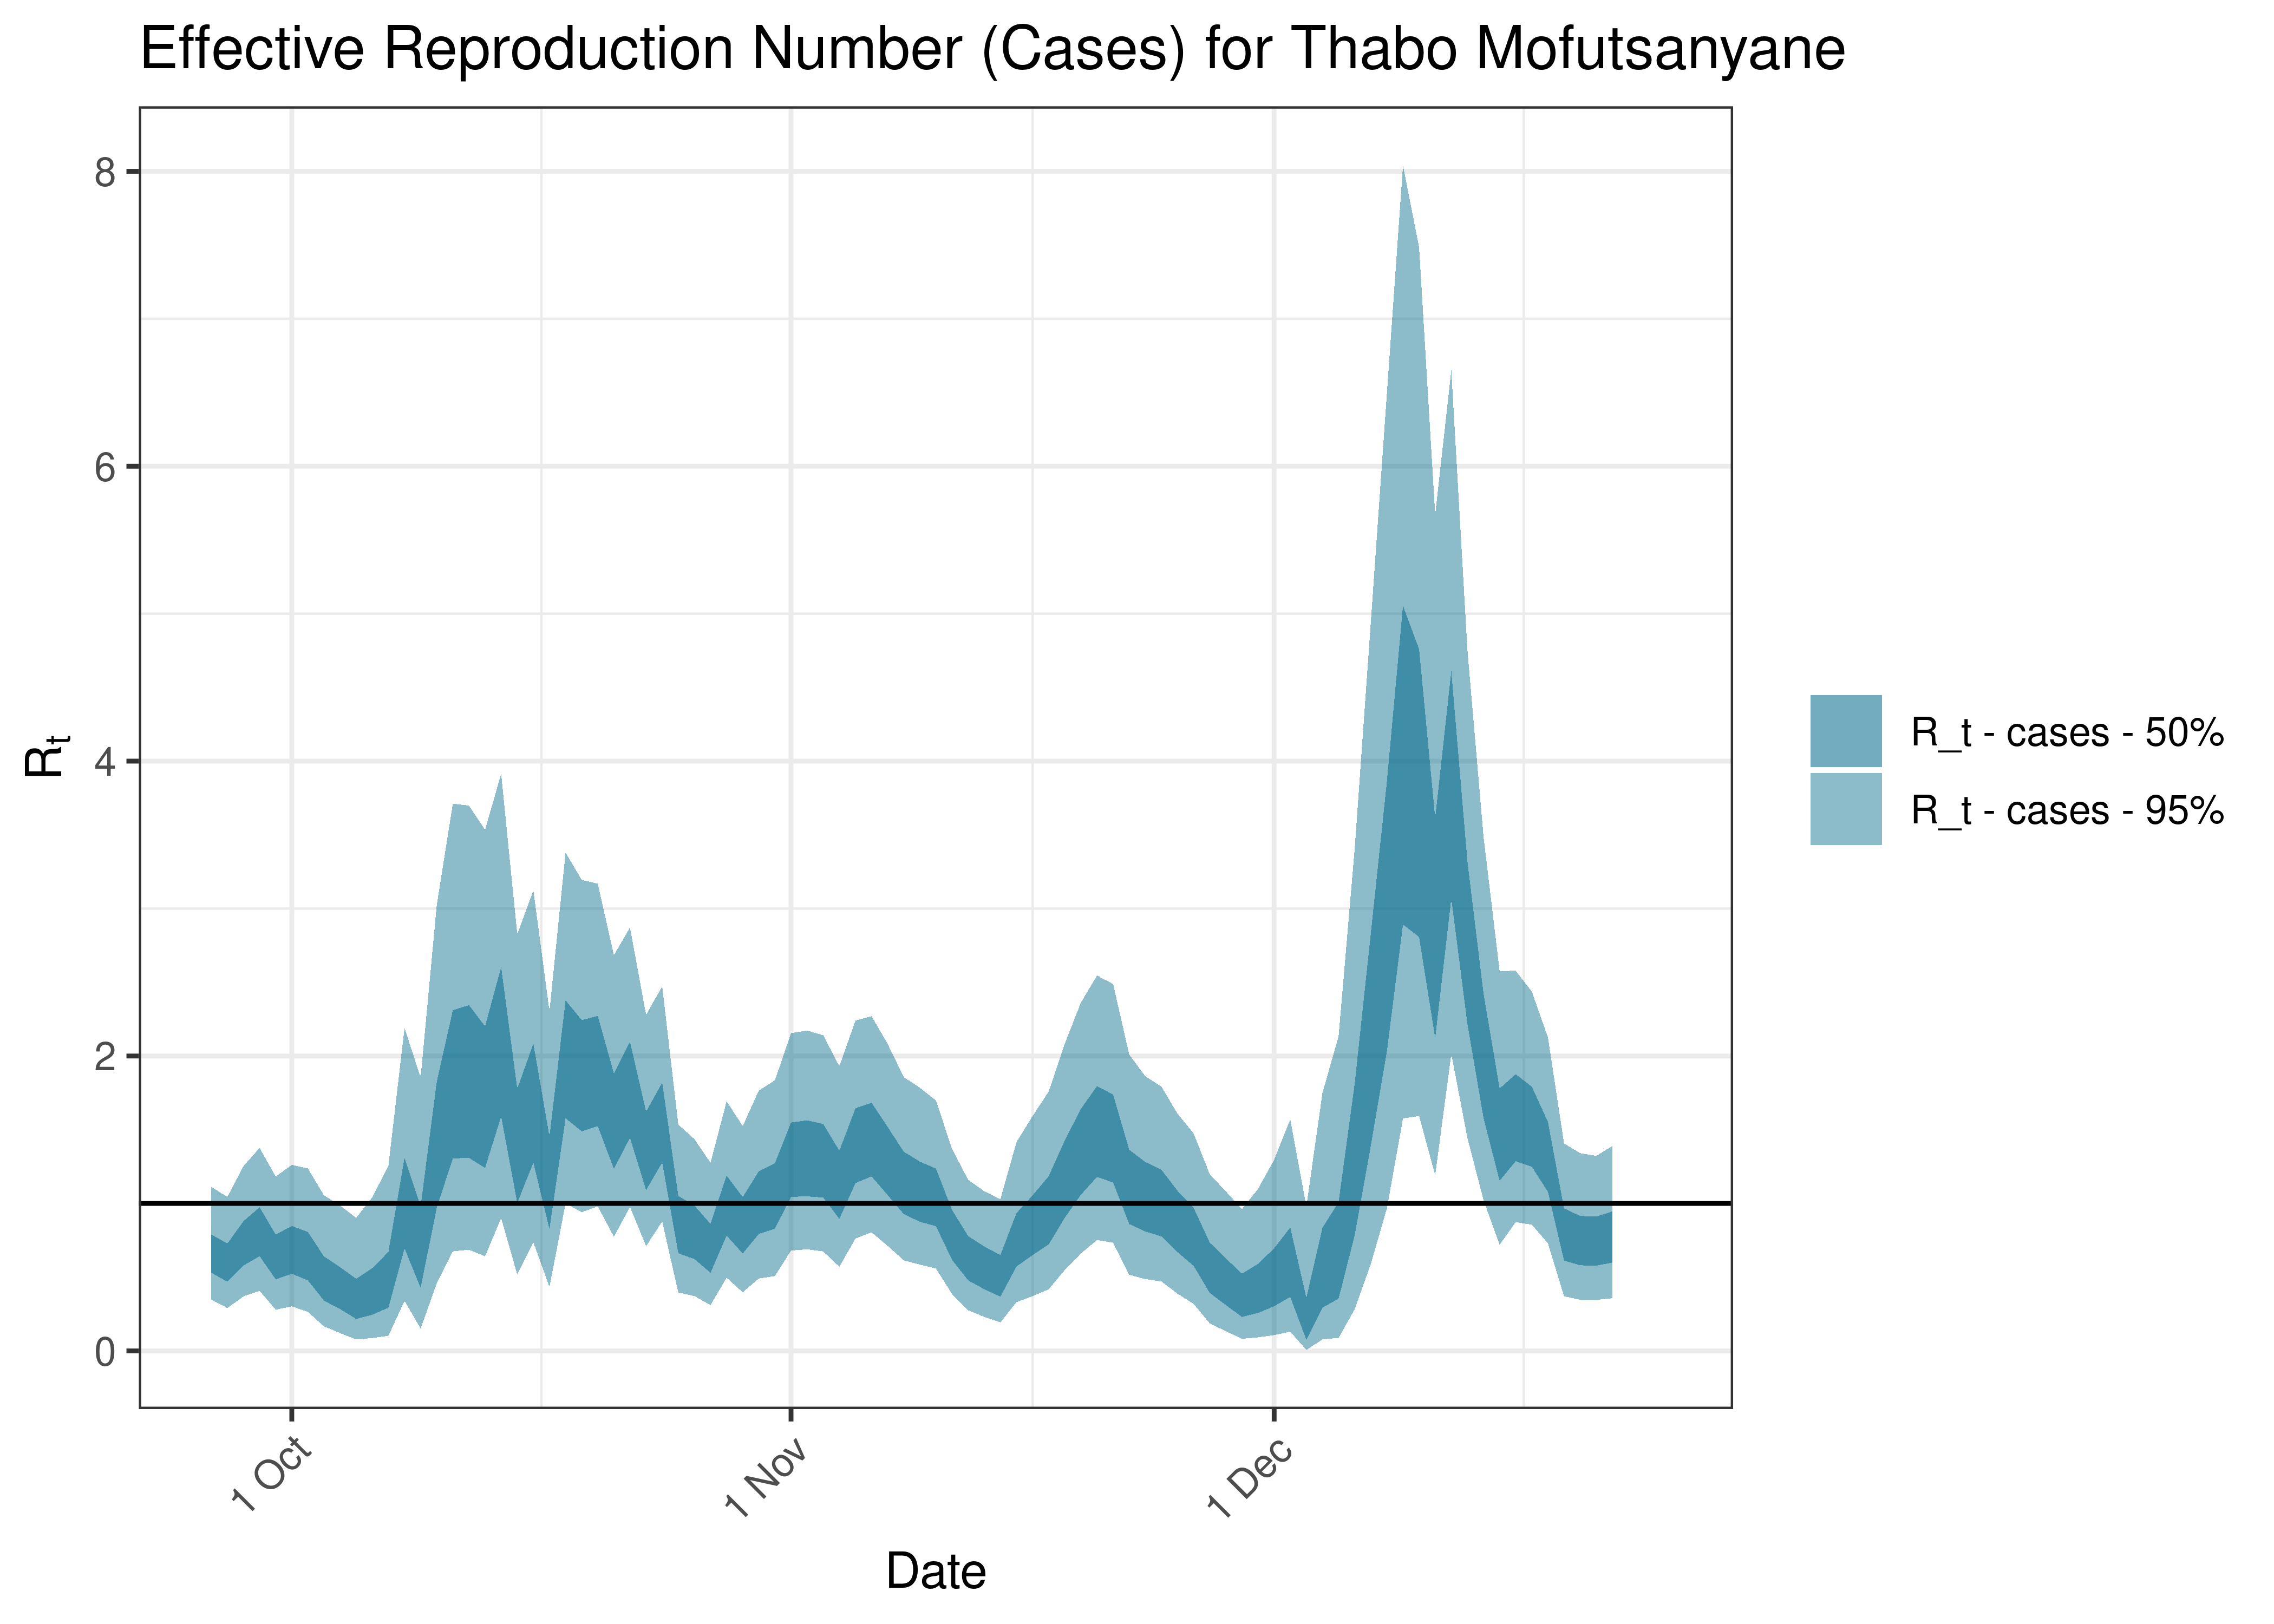 Estimated Effective Reproduction Number Based on Cases for Thabo Mofutsanyane over last 90 days